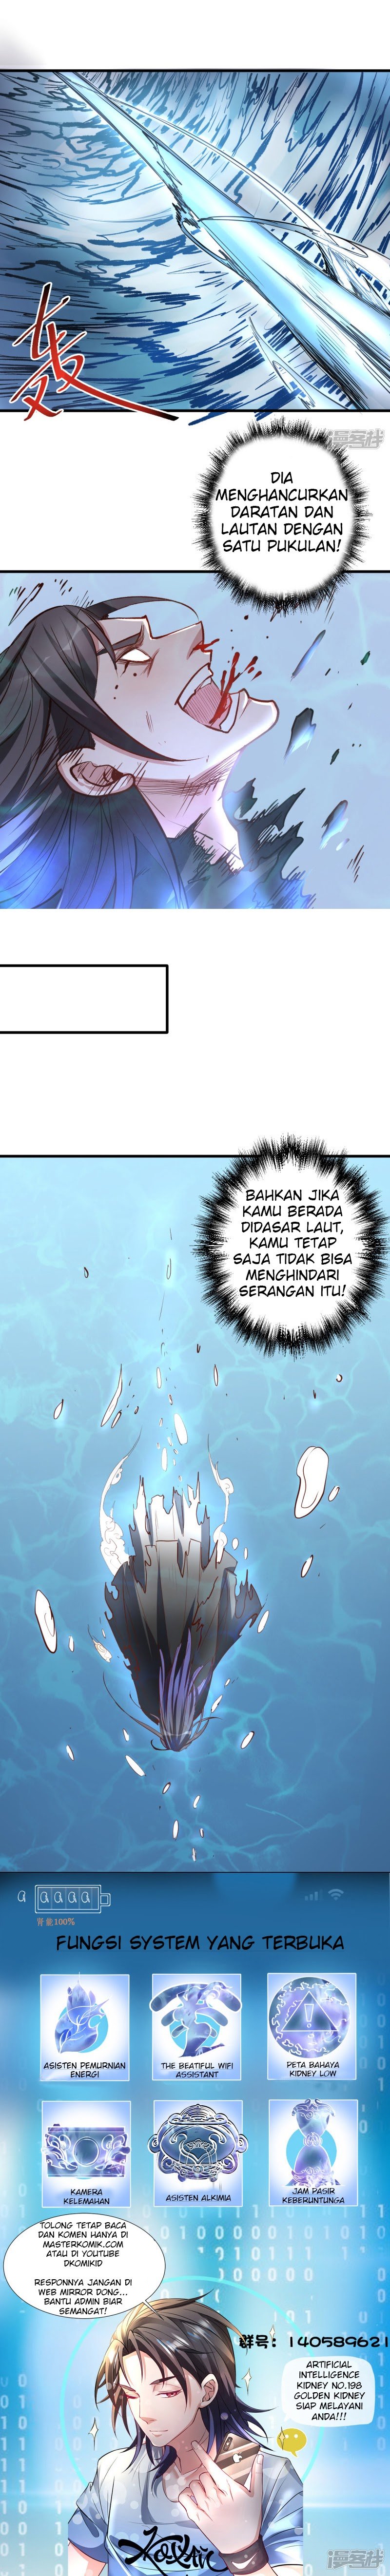 The Strongest Golden Kidney System Chapter 31